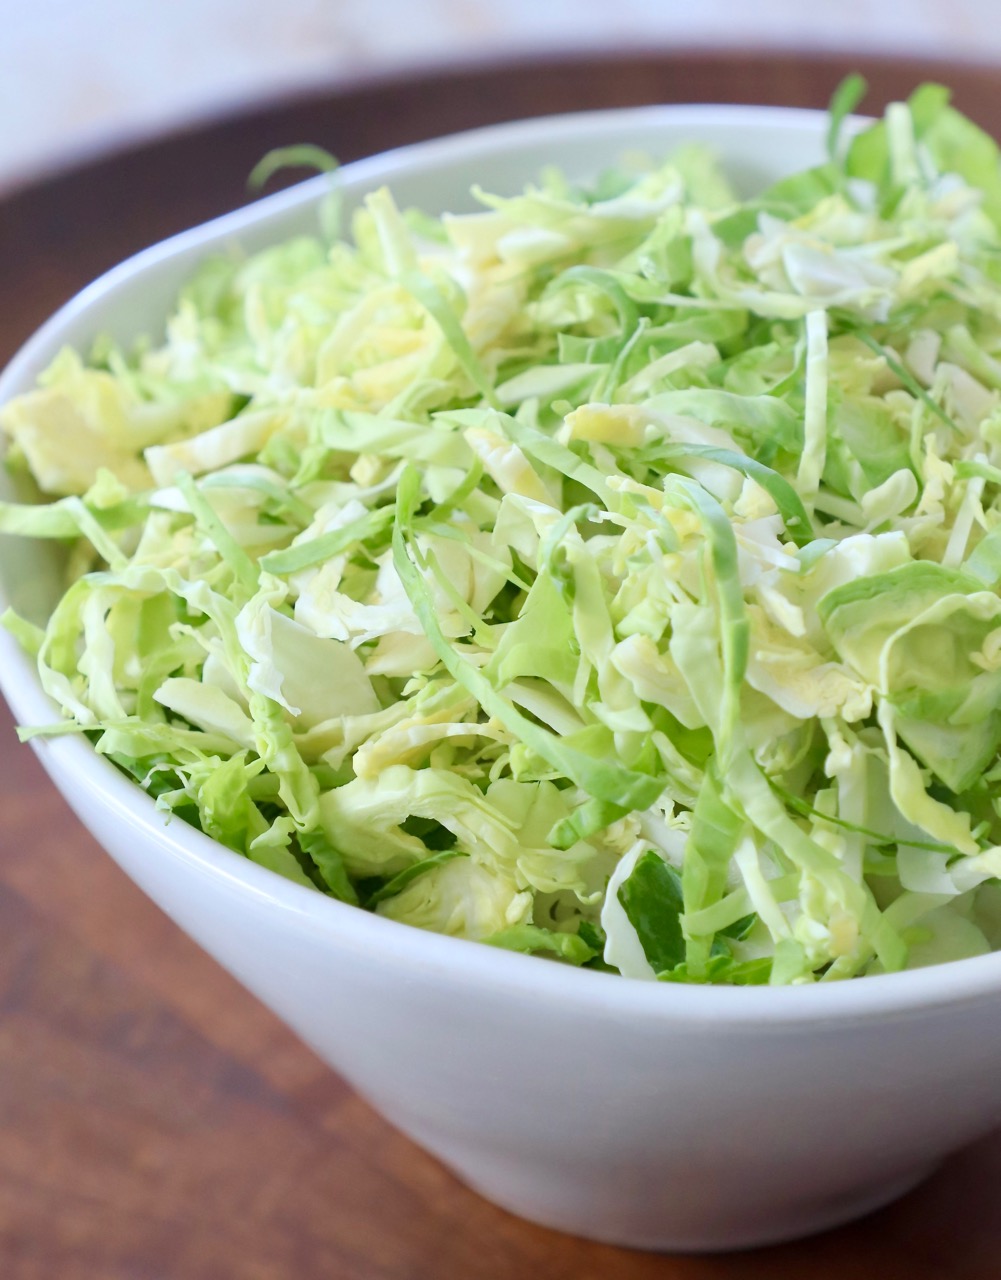 shredded brussels sprouts in white bowl